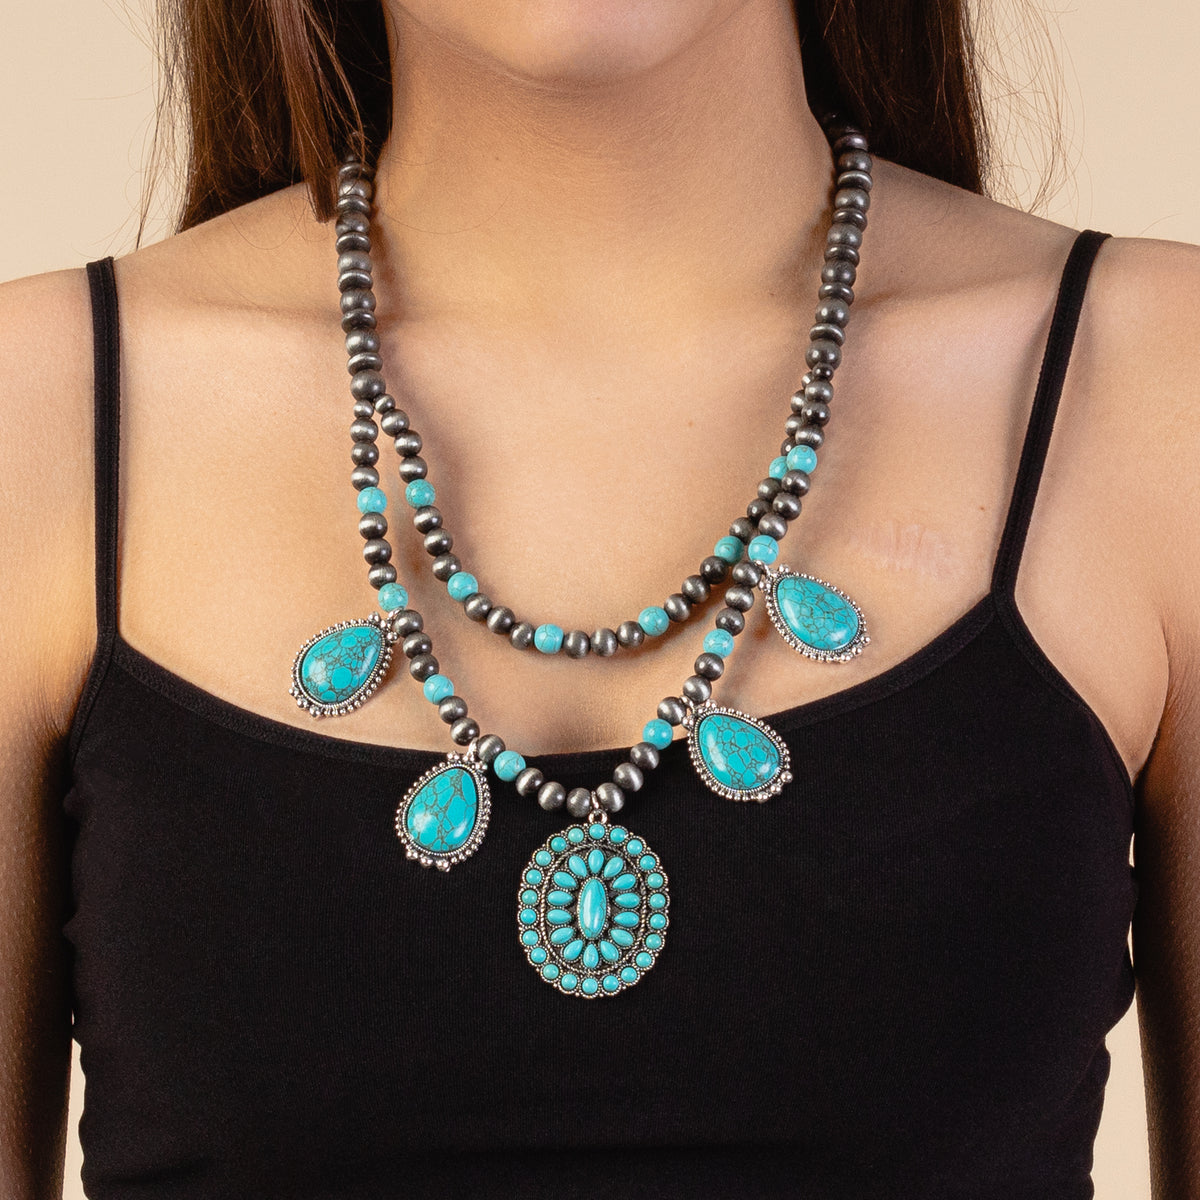 72895 - Squash Blossom Necklace - Turquoise & Silver